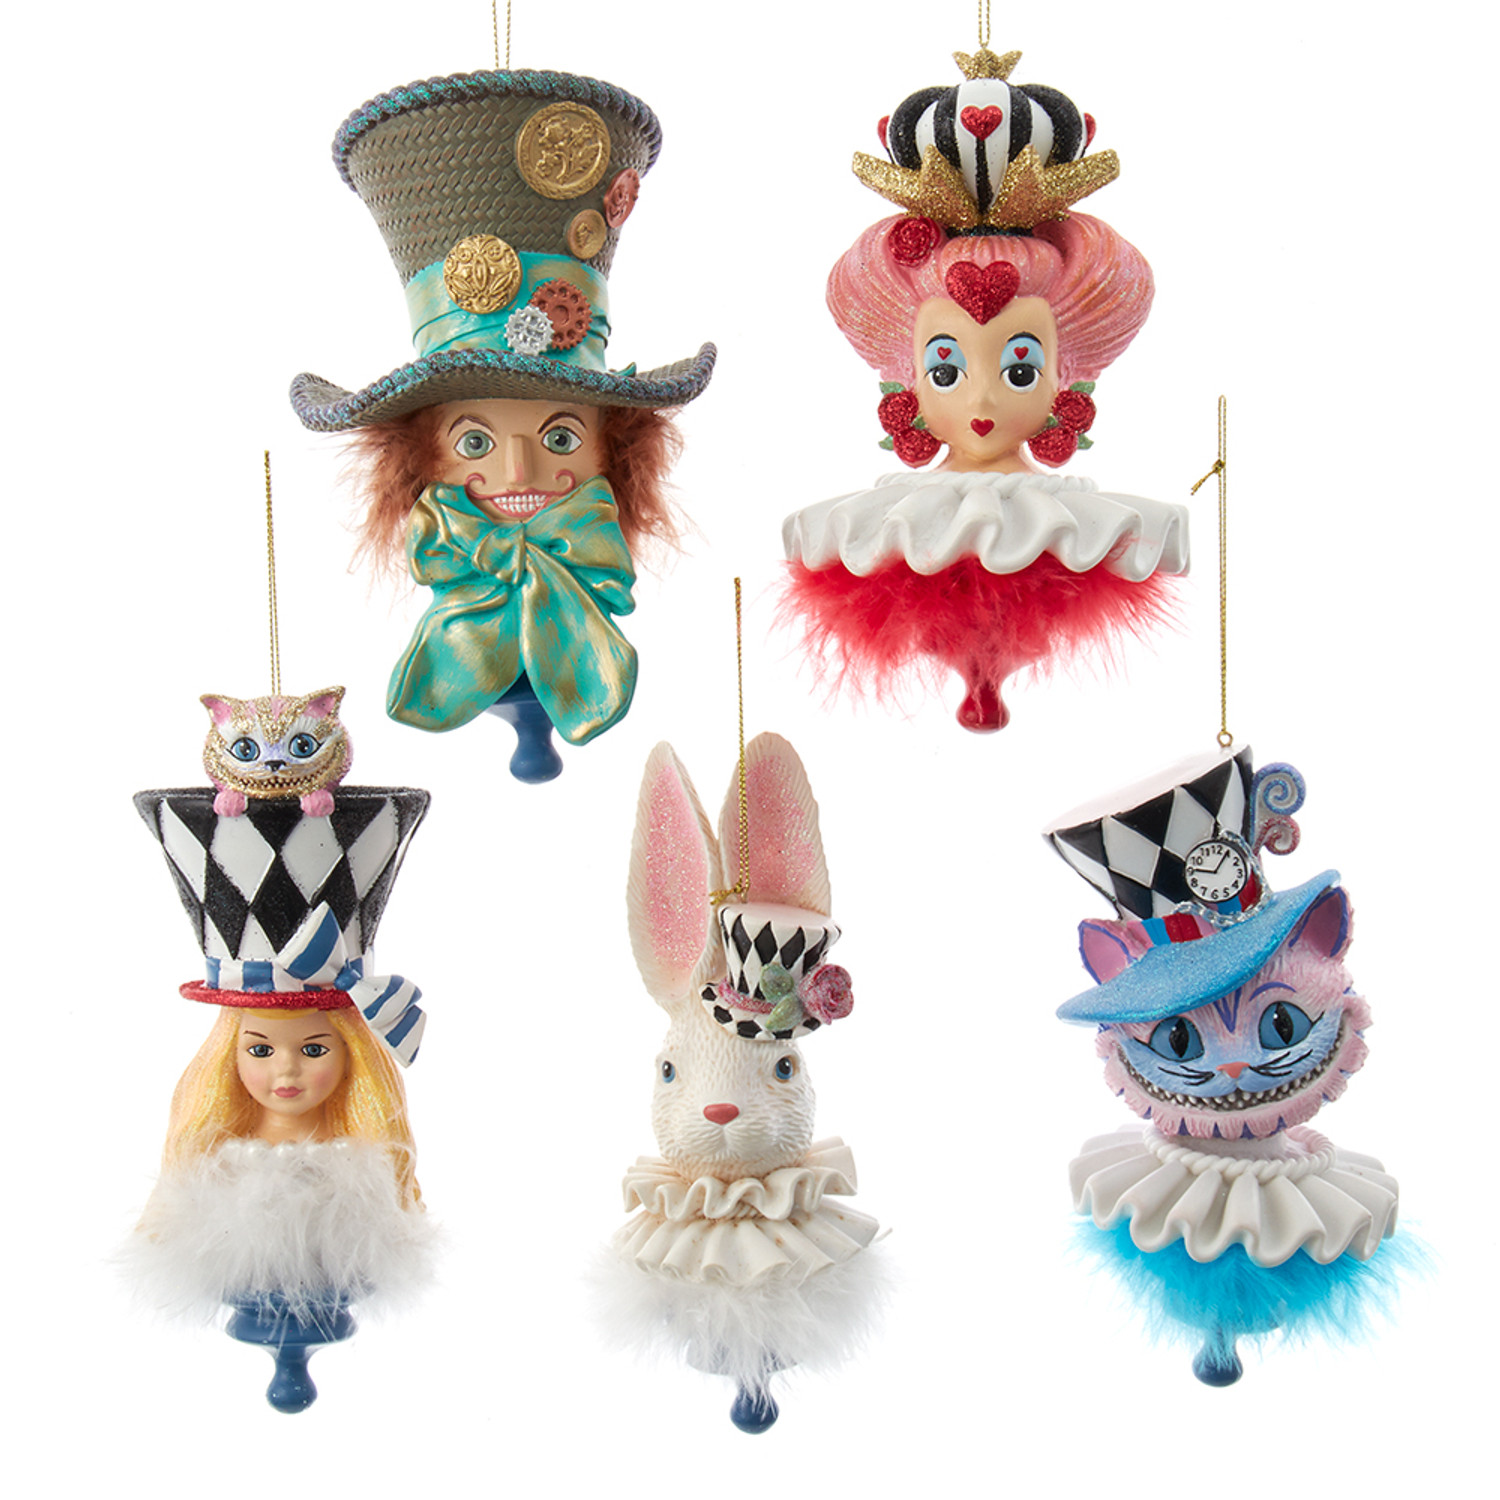 A roundup of Alice in Wonderland accessories from